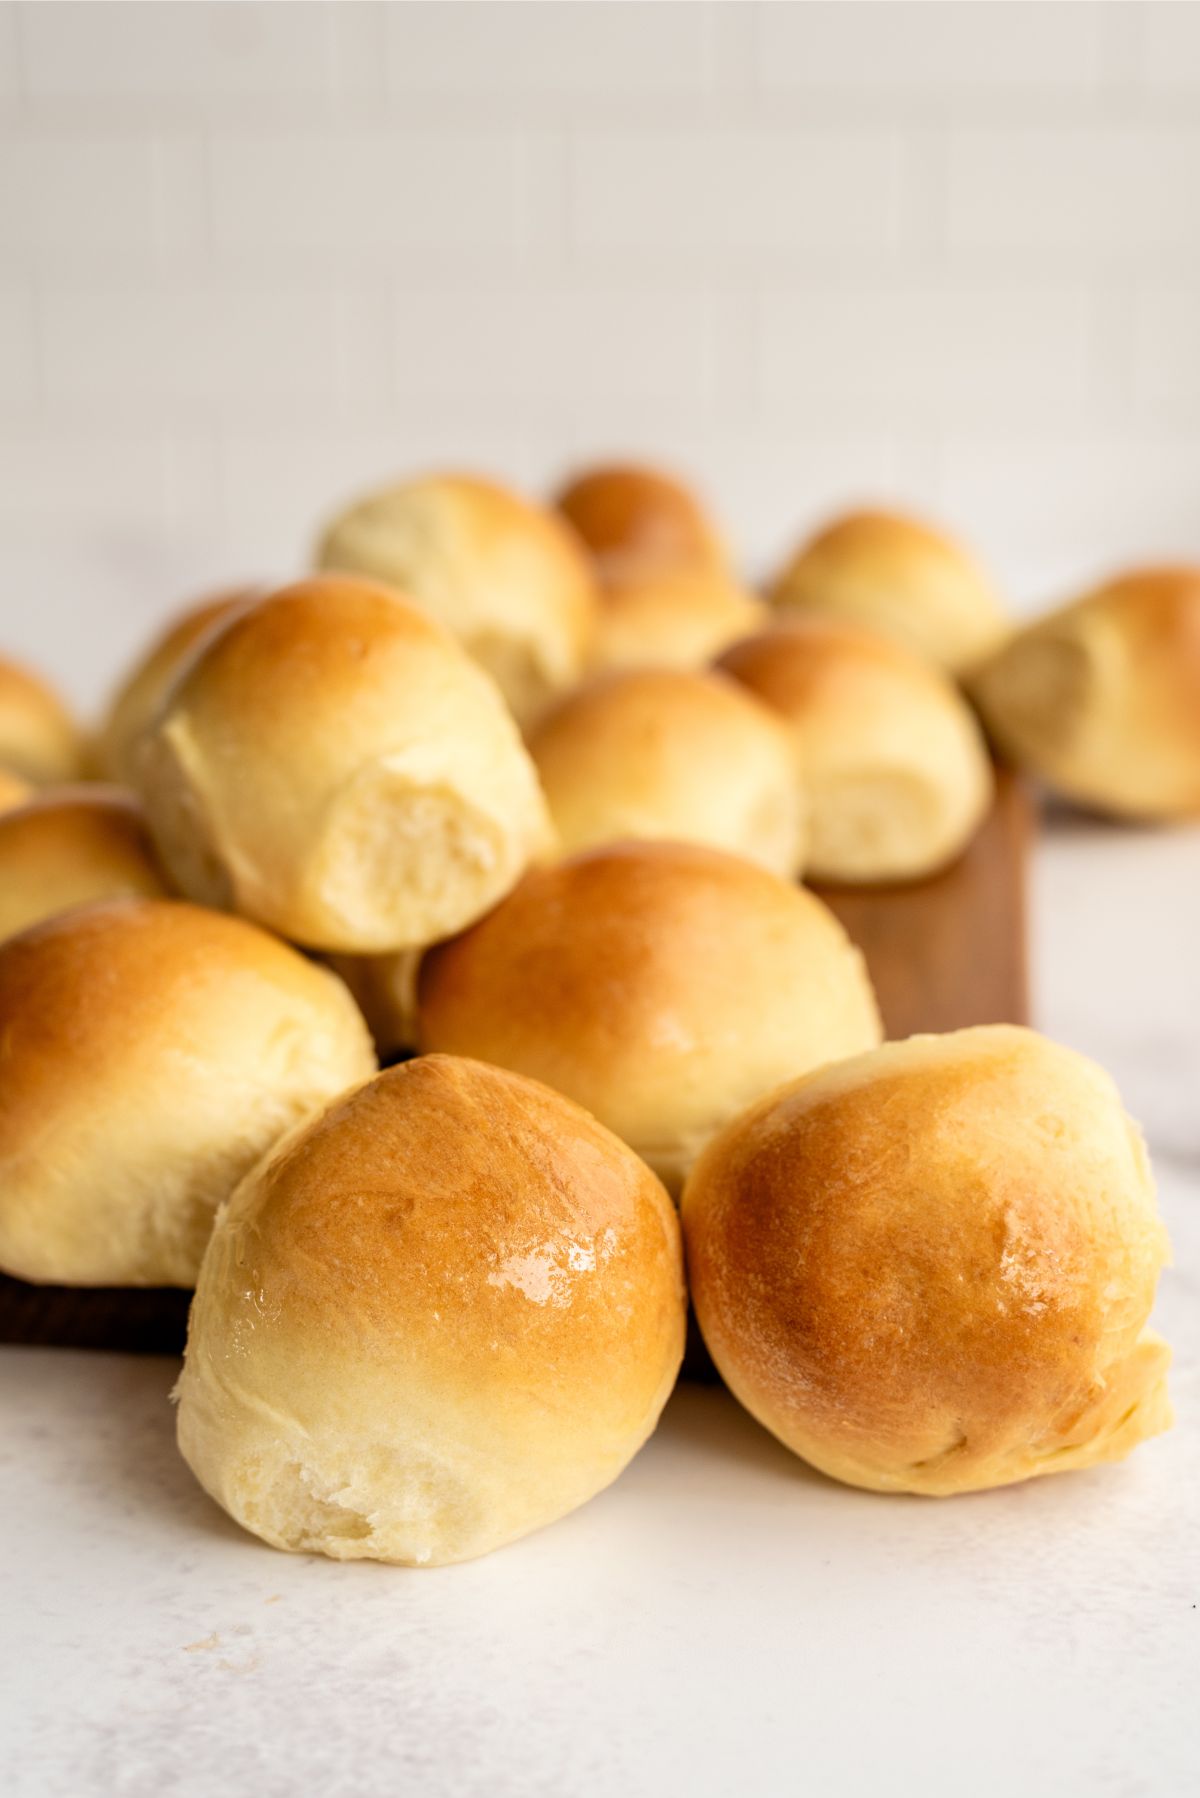 Parkerhouse Rolls freshly baked on a cutting board